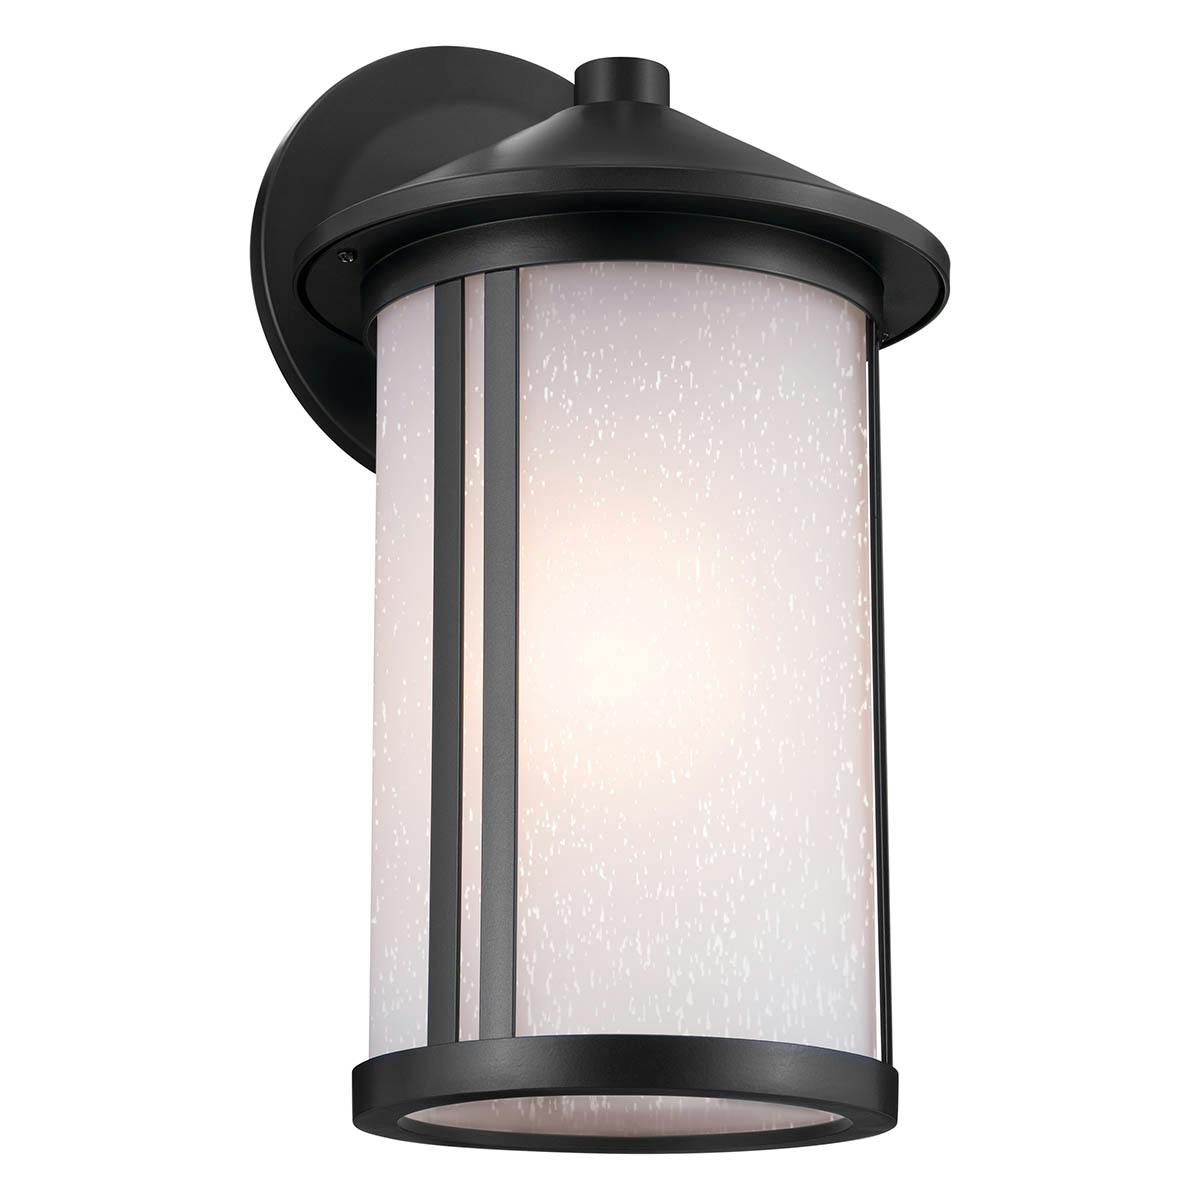 Lombard 16.5" 1 Light Wall Light Black on a white background